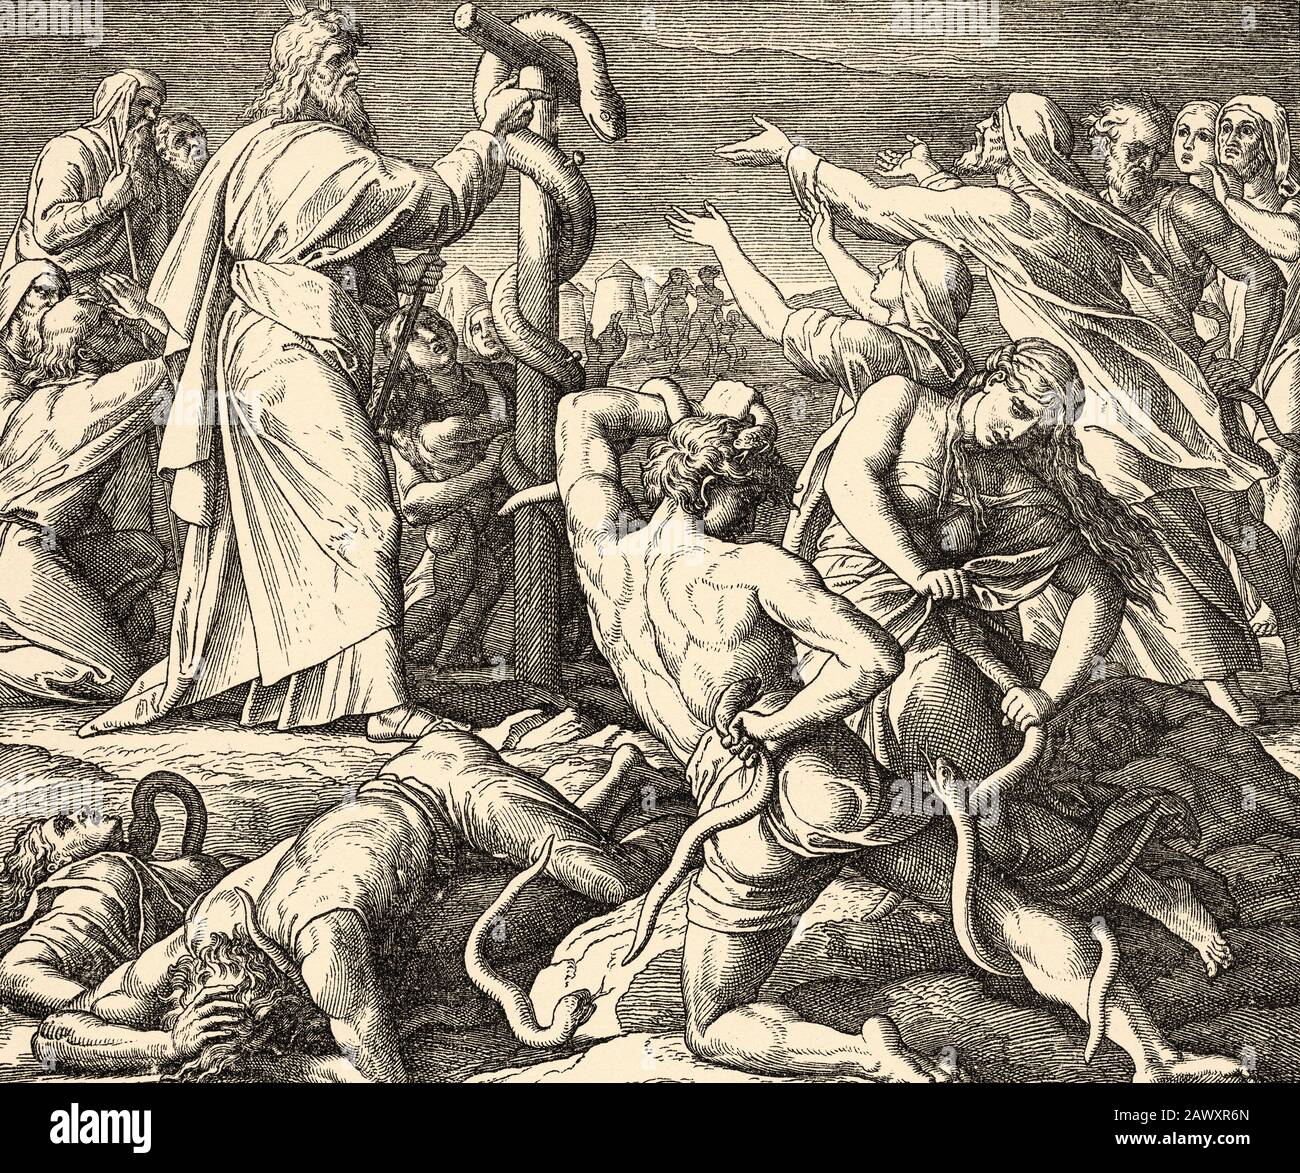 Exodus. The Serpent in the Wilderness. Jahve sent snakes to bite them and Moses interceded. Sacred biblical history Old Testament. Old engraving Stock Photo